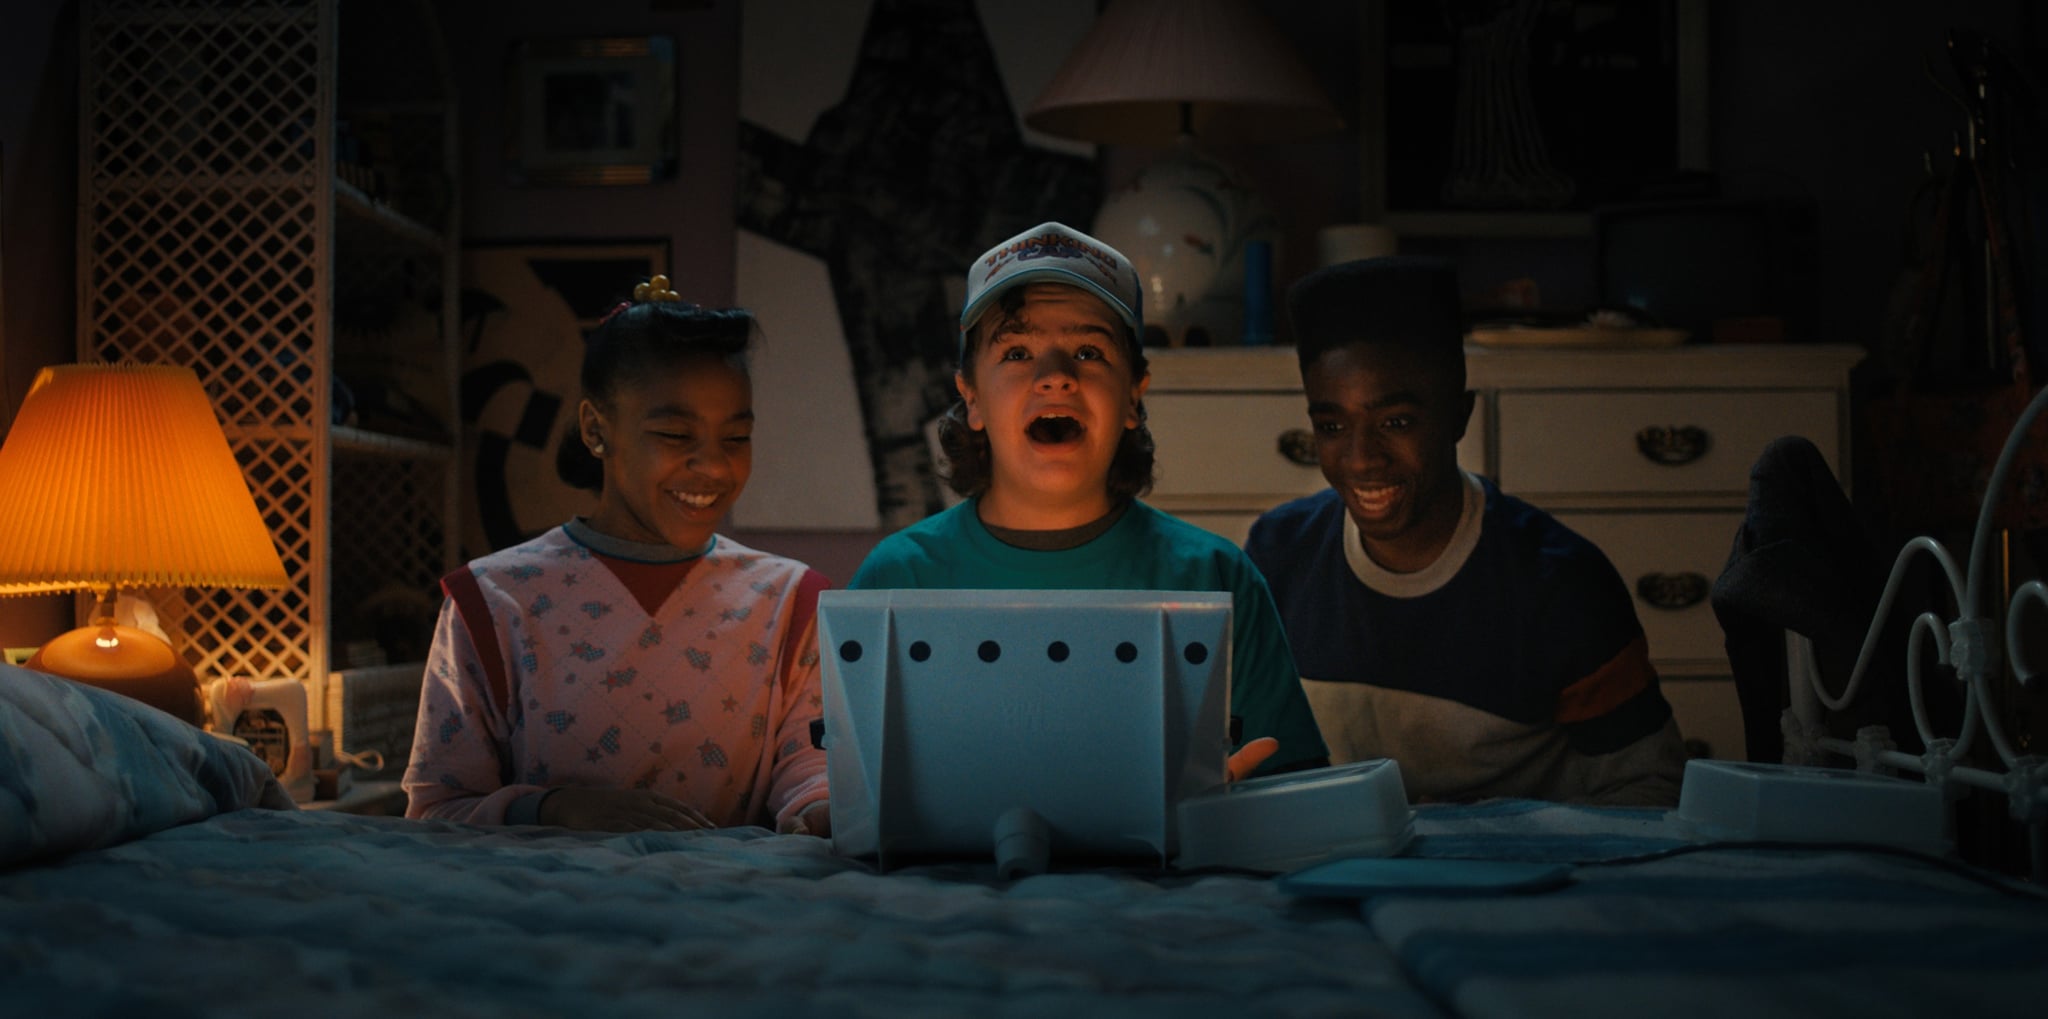 Scener To Host Stranger Things 4 Volume 2 Watch Party Premiere